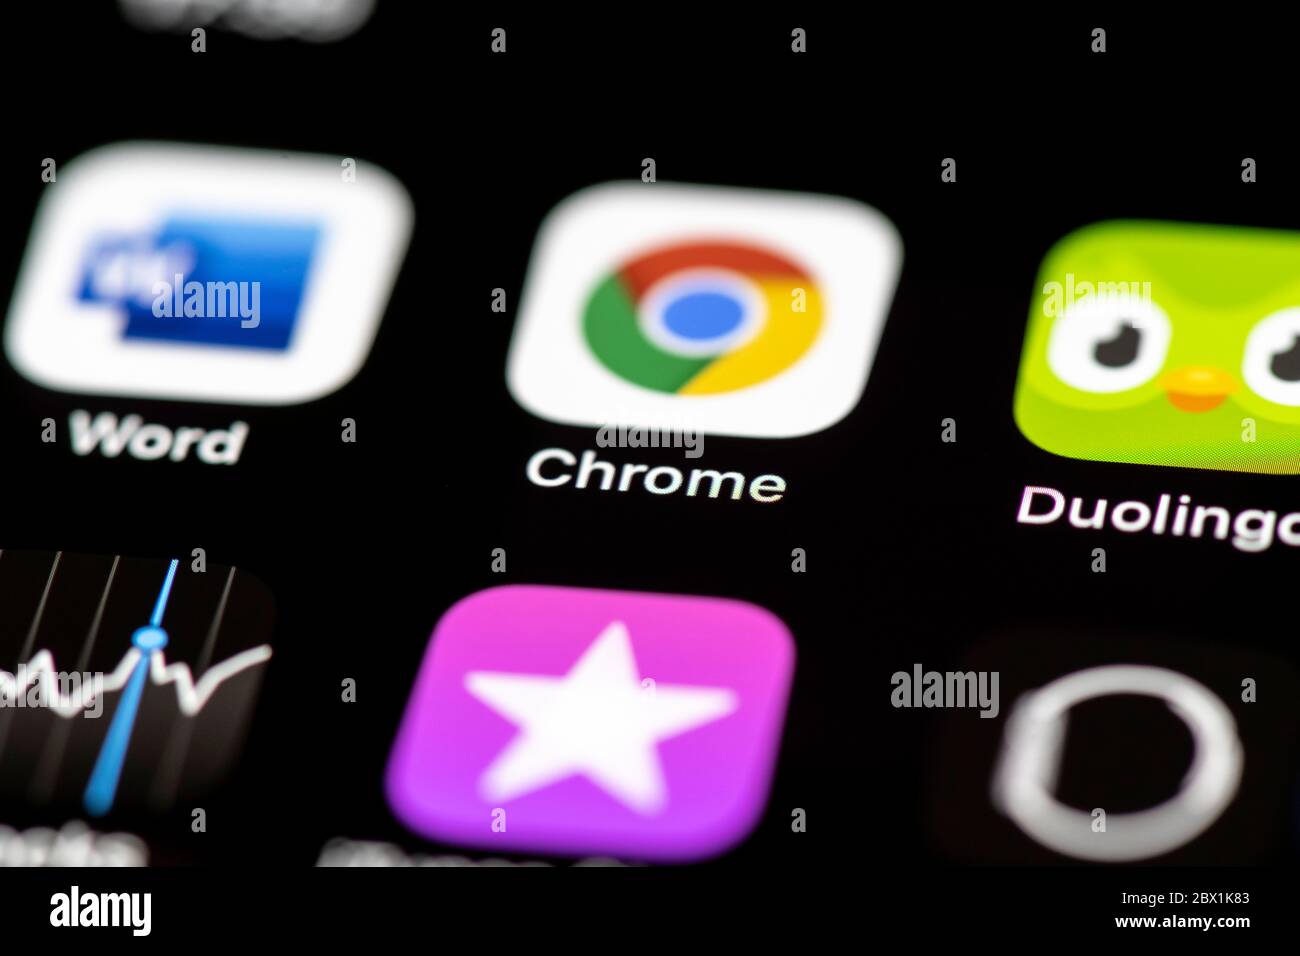 Chrome Browser, App Icons on a mobile phone display, iPhone, Smartphone, close-up Stock Photo